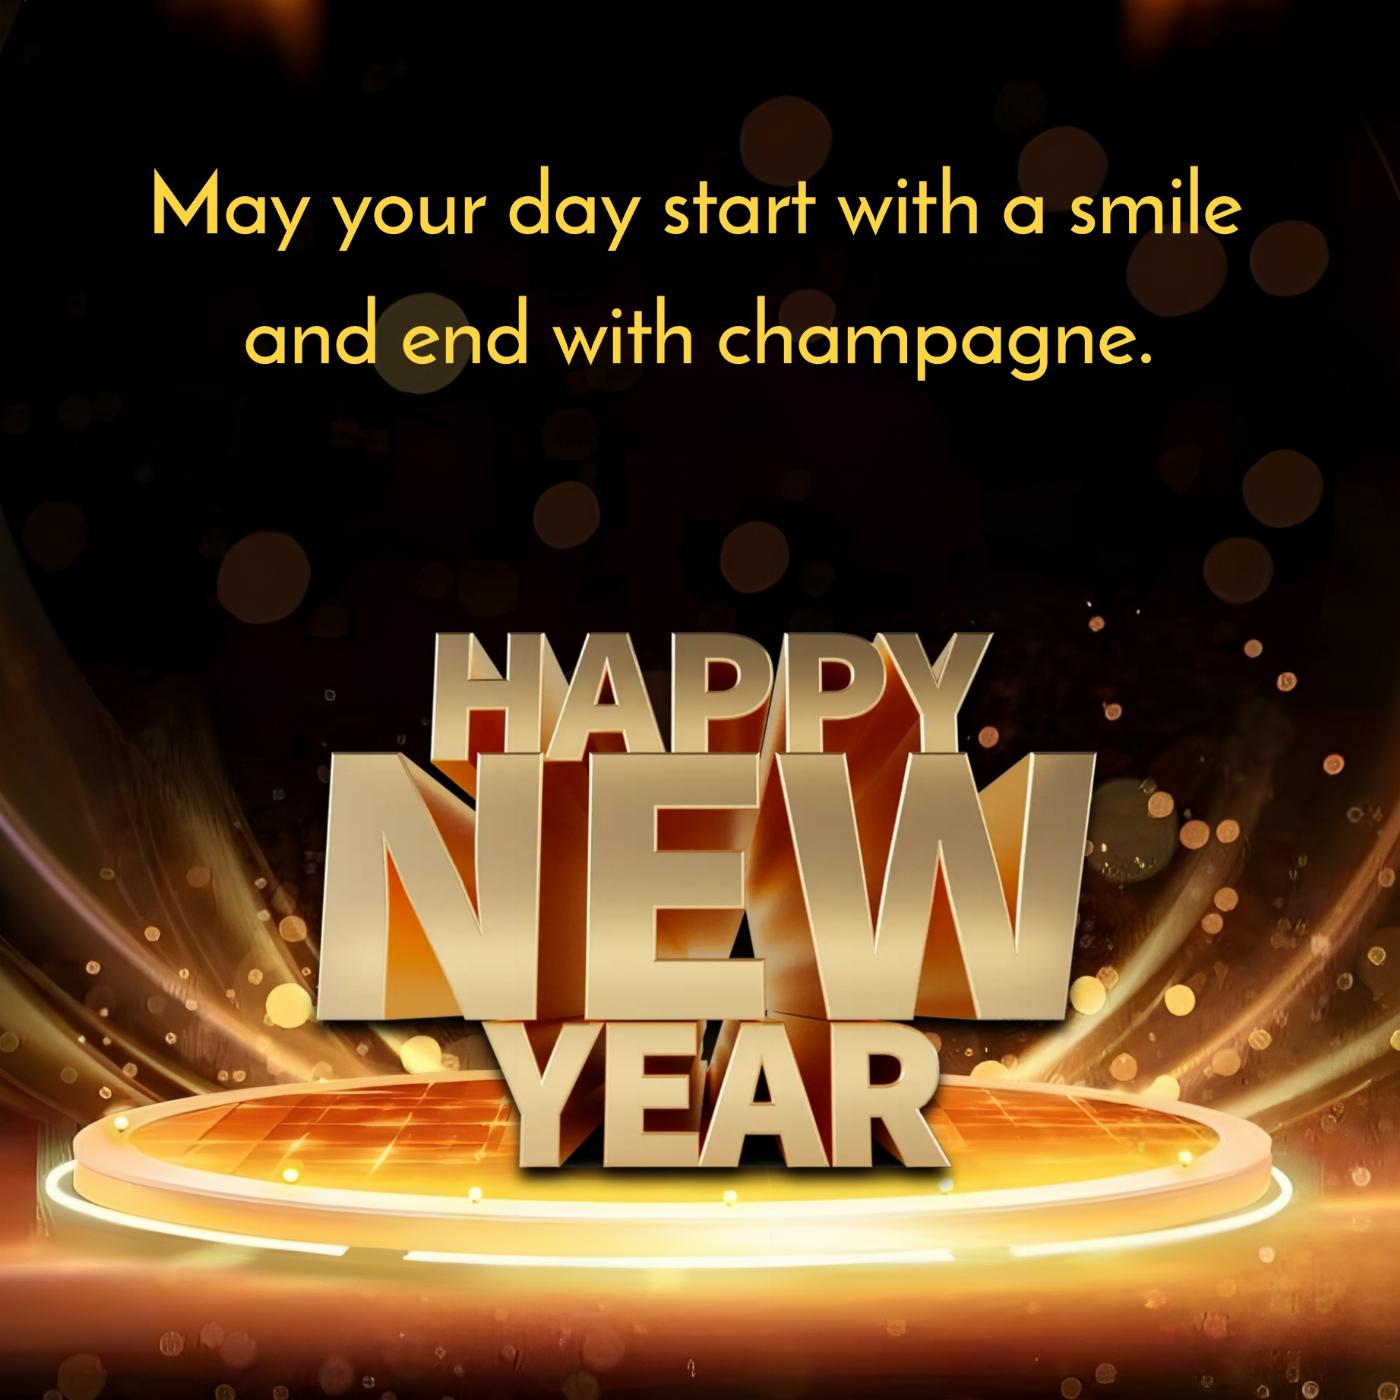 May your day start with a smile and end with champagne